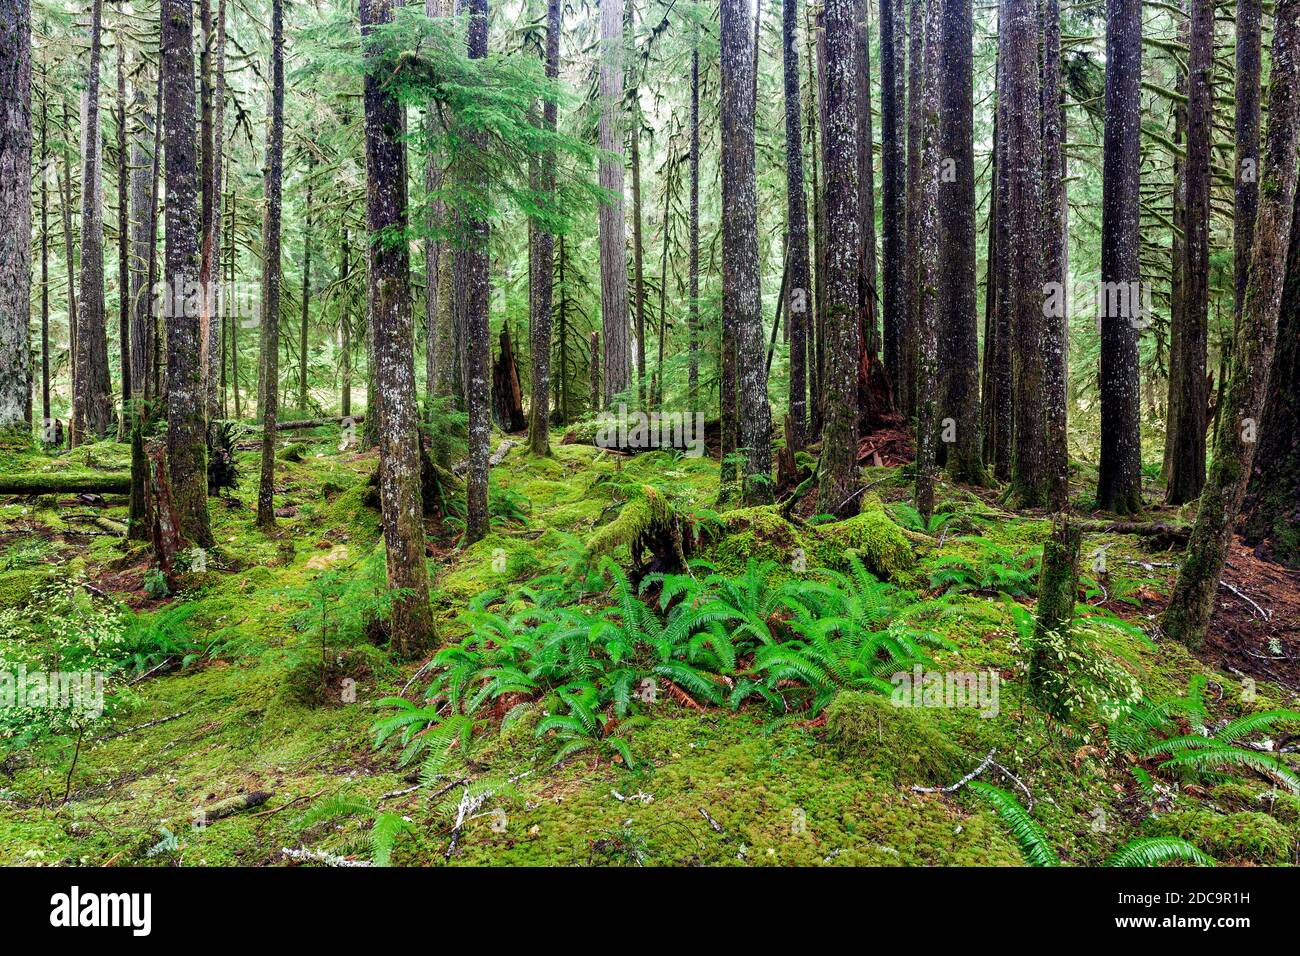 WA17904-00....WASHINGTON - Rain forest along the Ancient Groves Trail in the Sol Duc Valley of Olympic National Park. Stock Photo